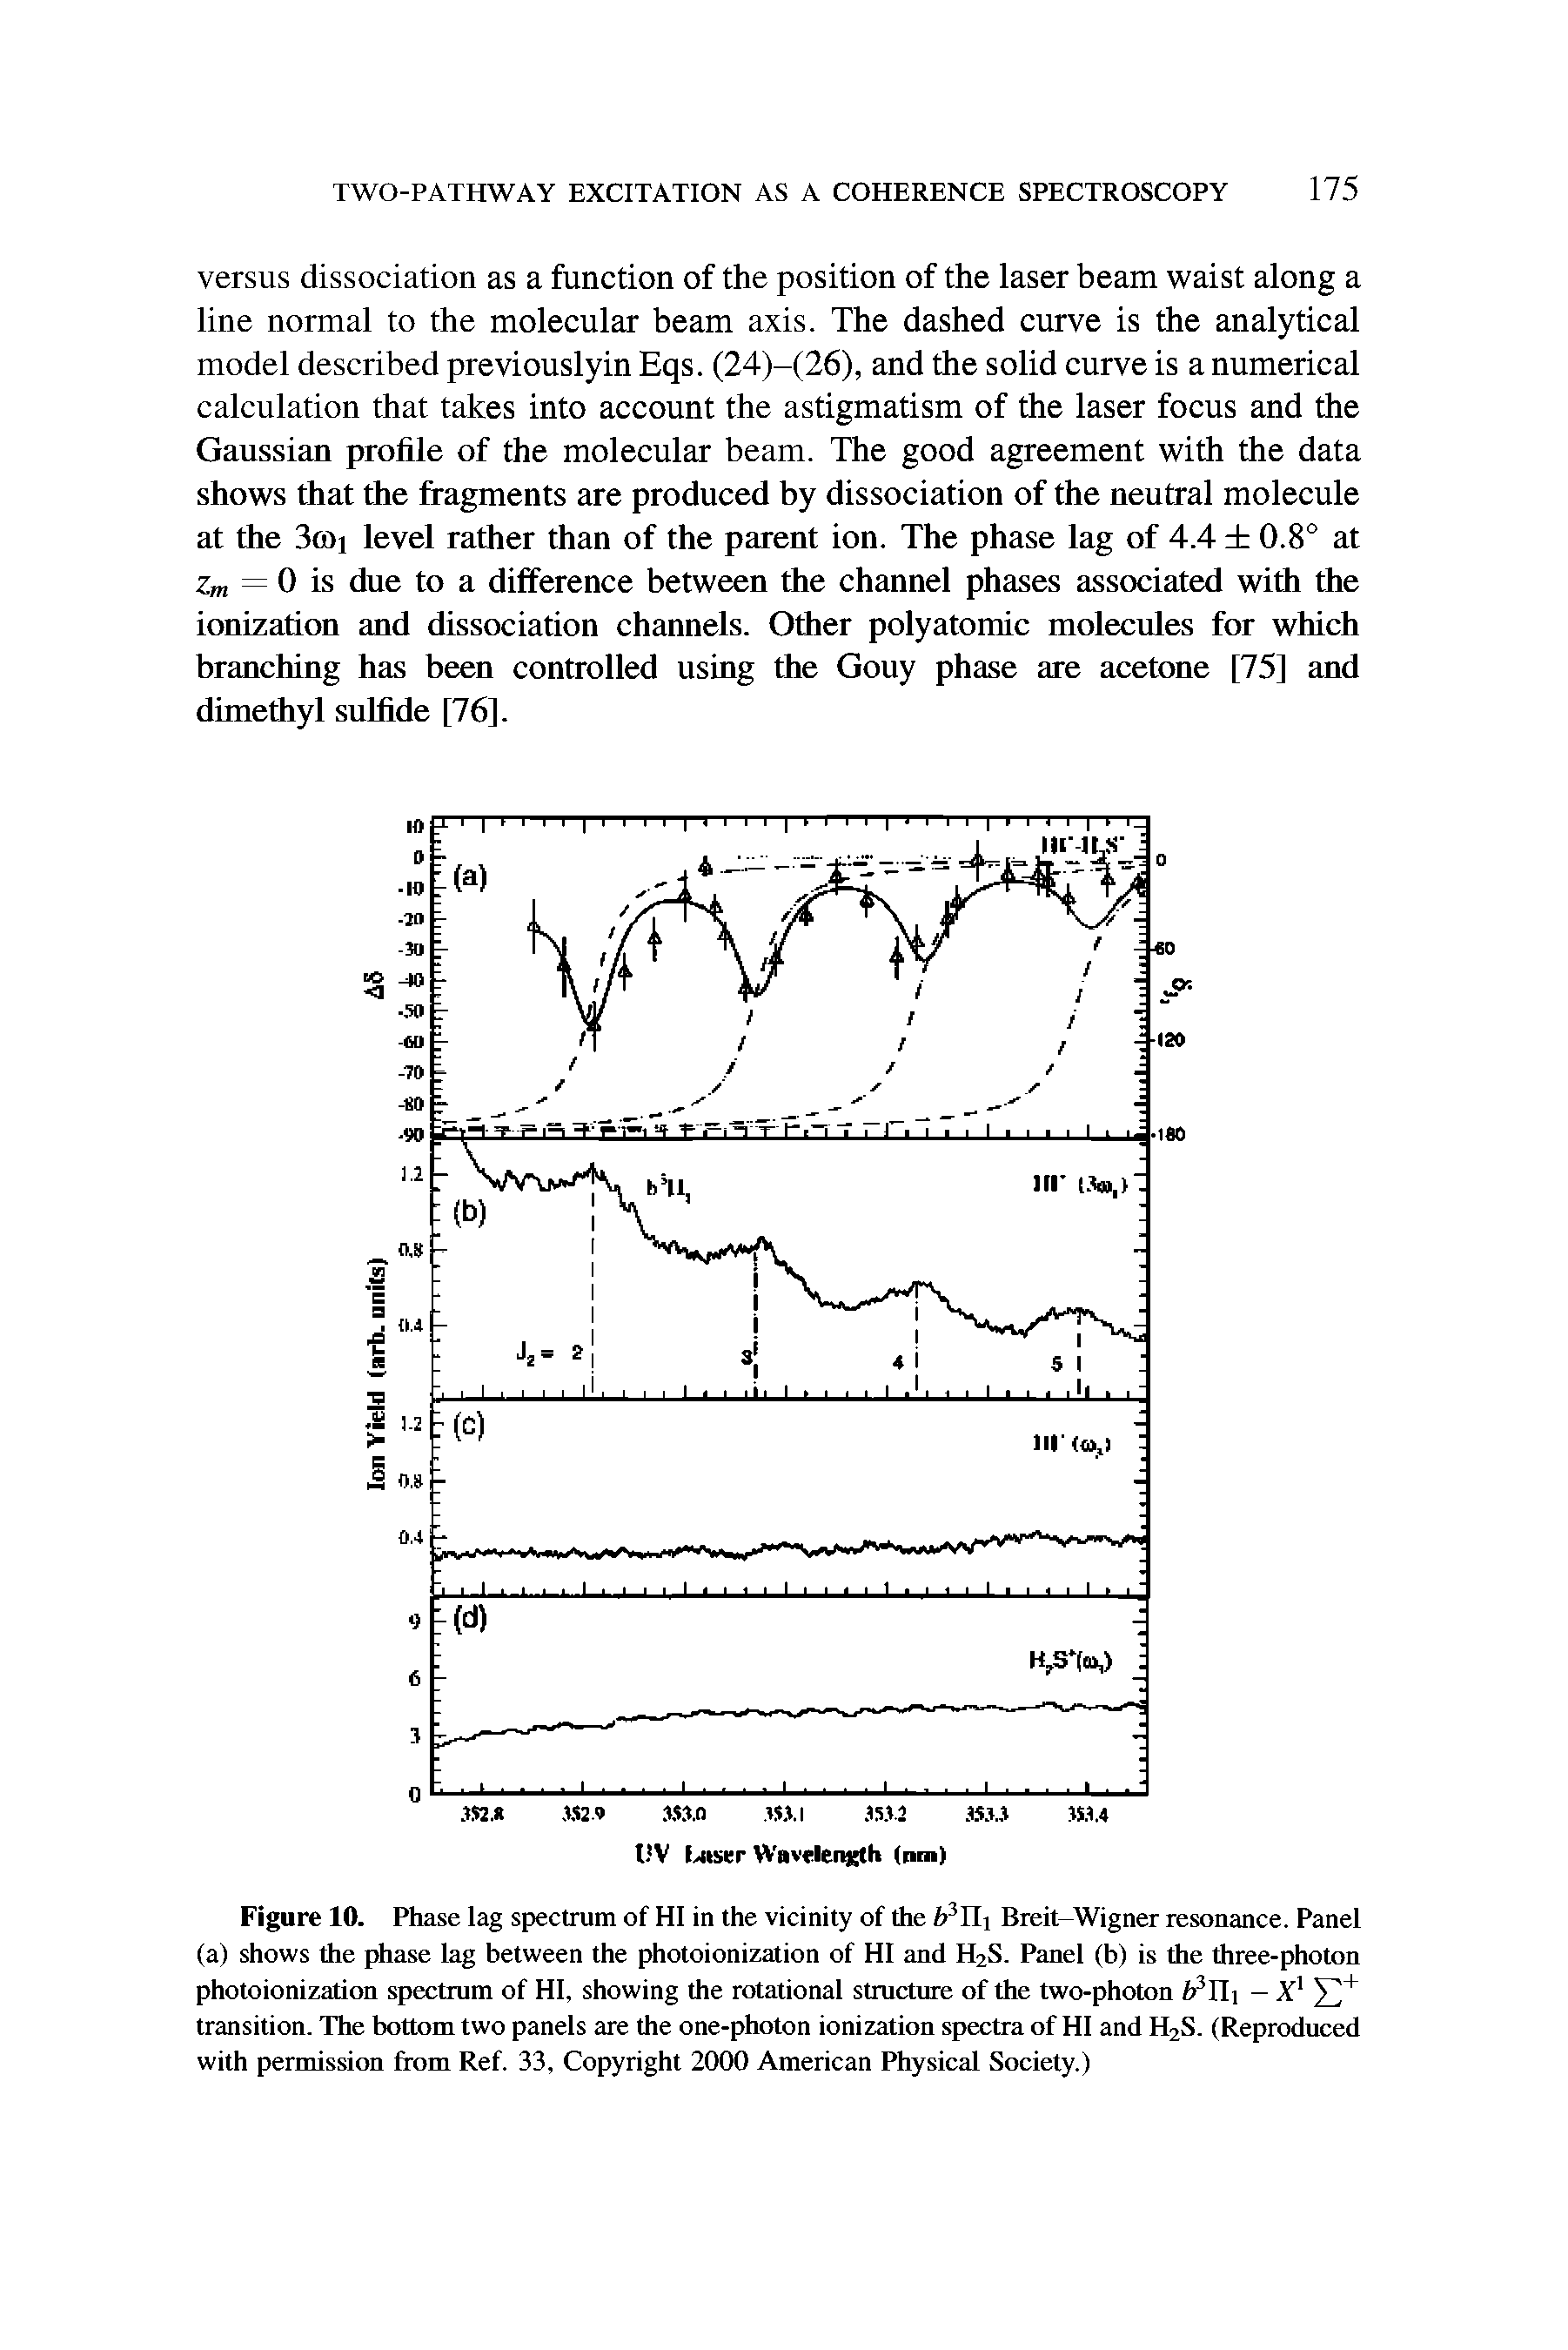 Figure 10. Phase lag spectrum of HI in the vicinity of the fe3IIi Breit-Wigner resonance. Panel (a) shows the phase lag between the photoionization of HI and H2S. Panel (b) is the three-photon photoionization spectrum of HI, showing the rotational structure of the two-photon fe3IIi - X1 1 transition. The bottom two panels are the one-photon ionization spectra of HI and H2S. (Reproduced with permission from Ref. 33, Copyright 2000 American Physical Society.)...